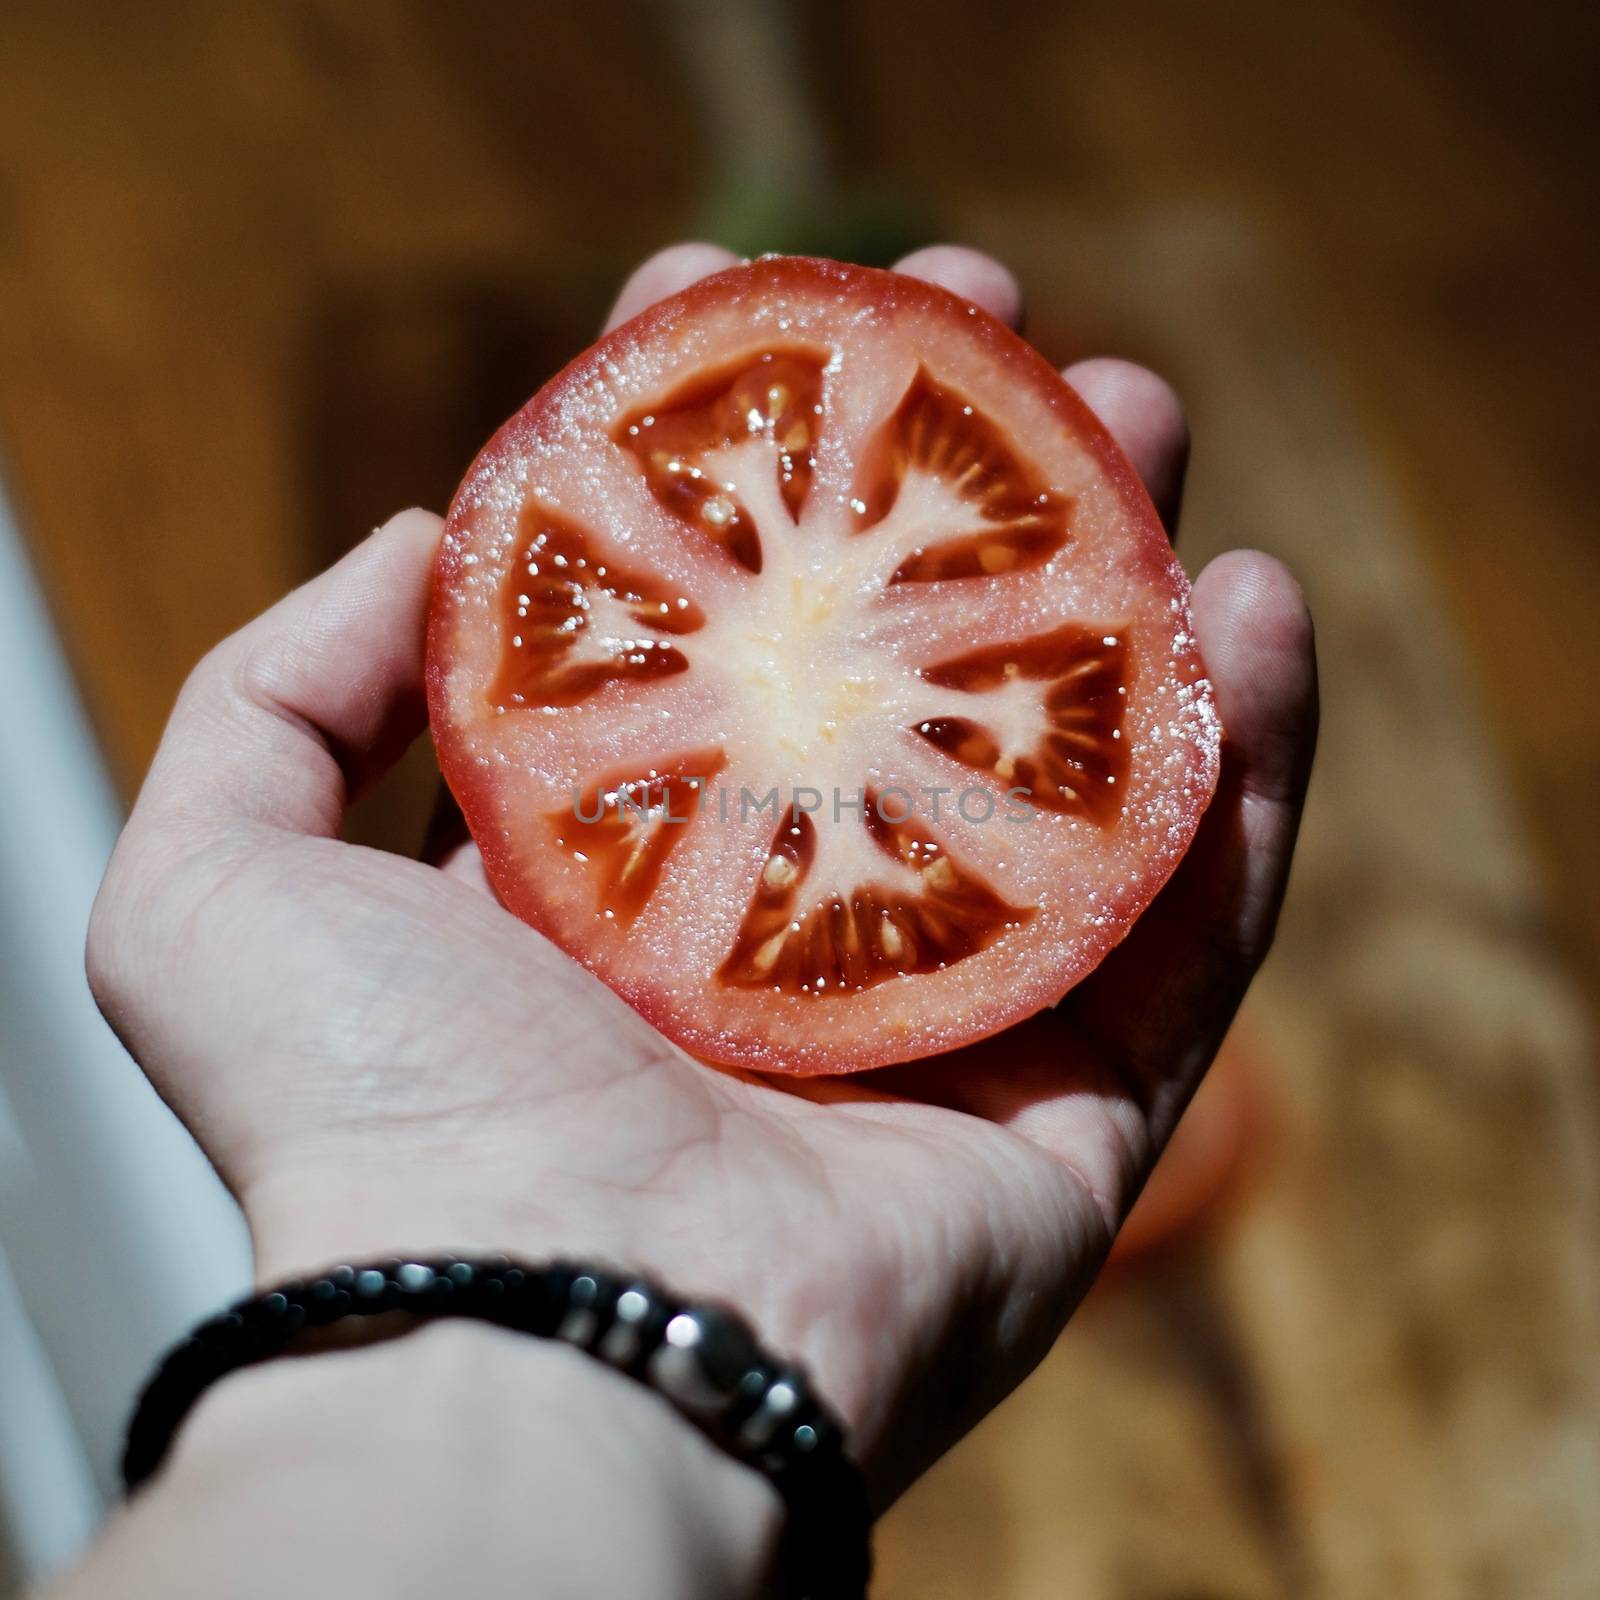 Fresh tomato in hand by adriantoday